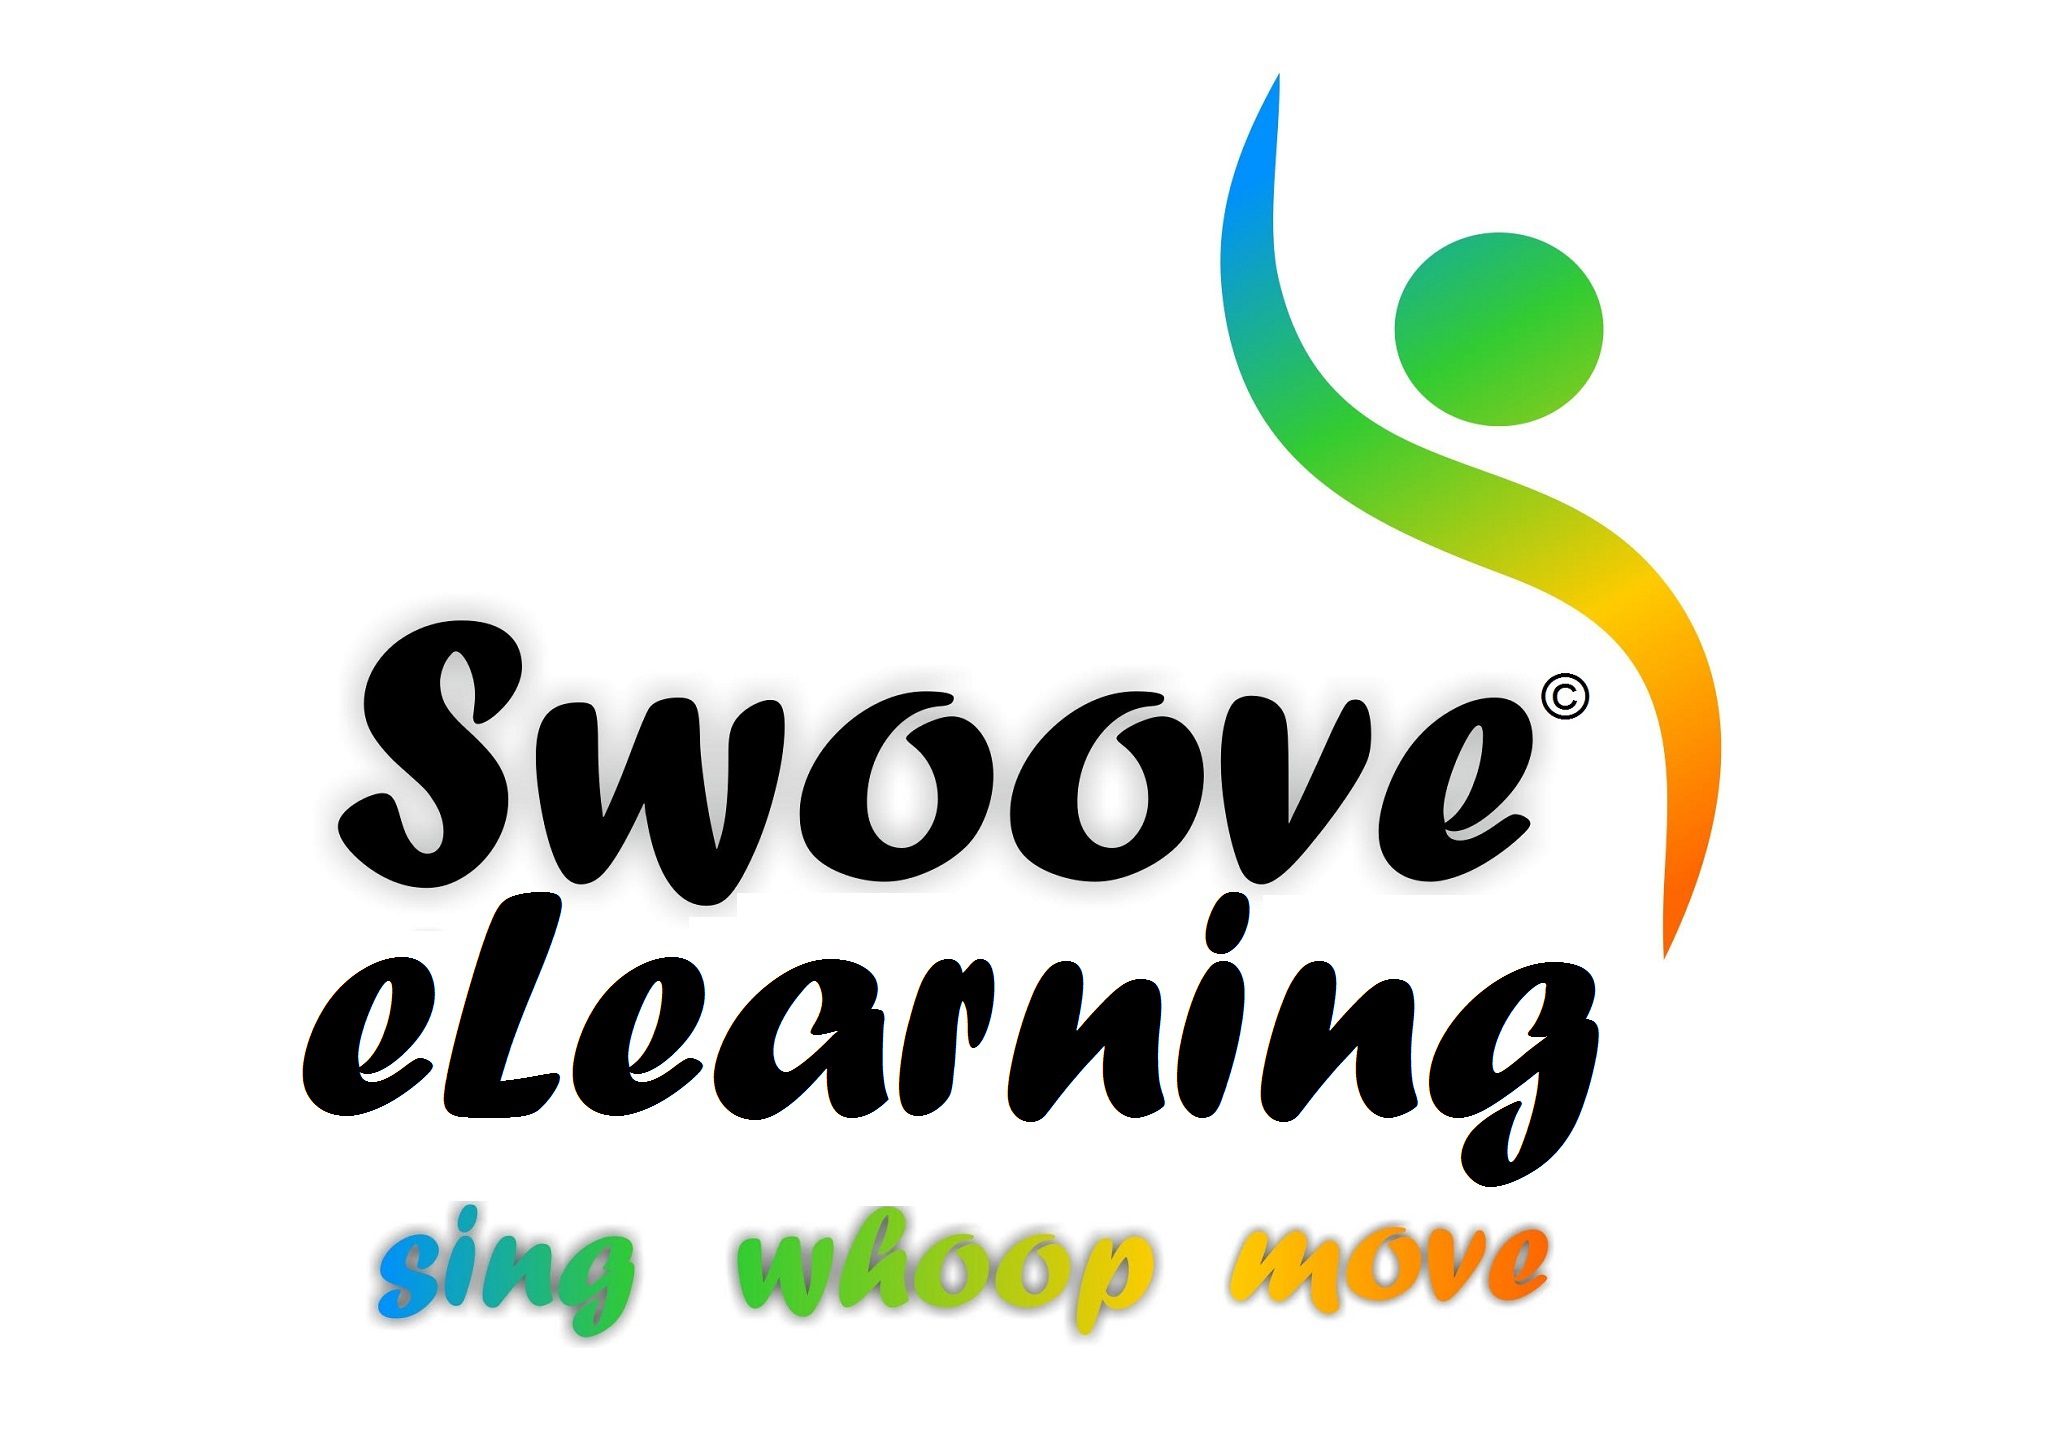 Swoove eLearning